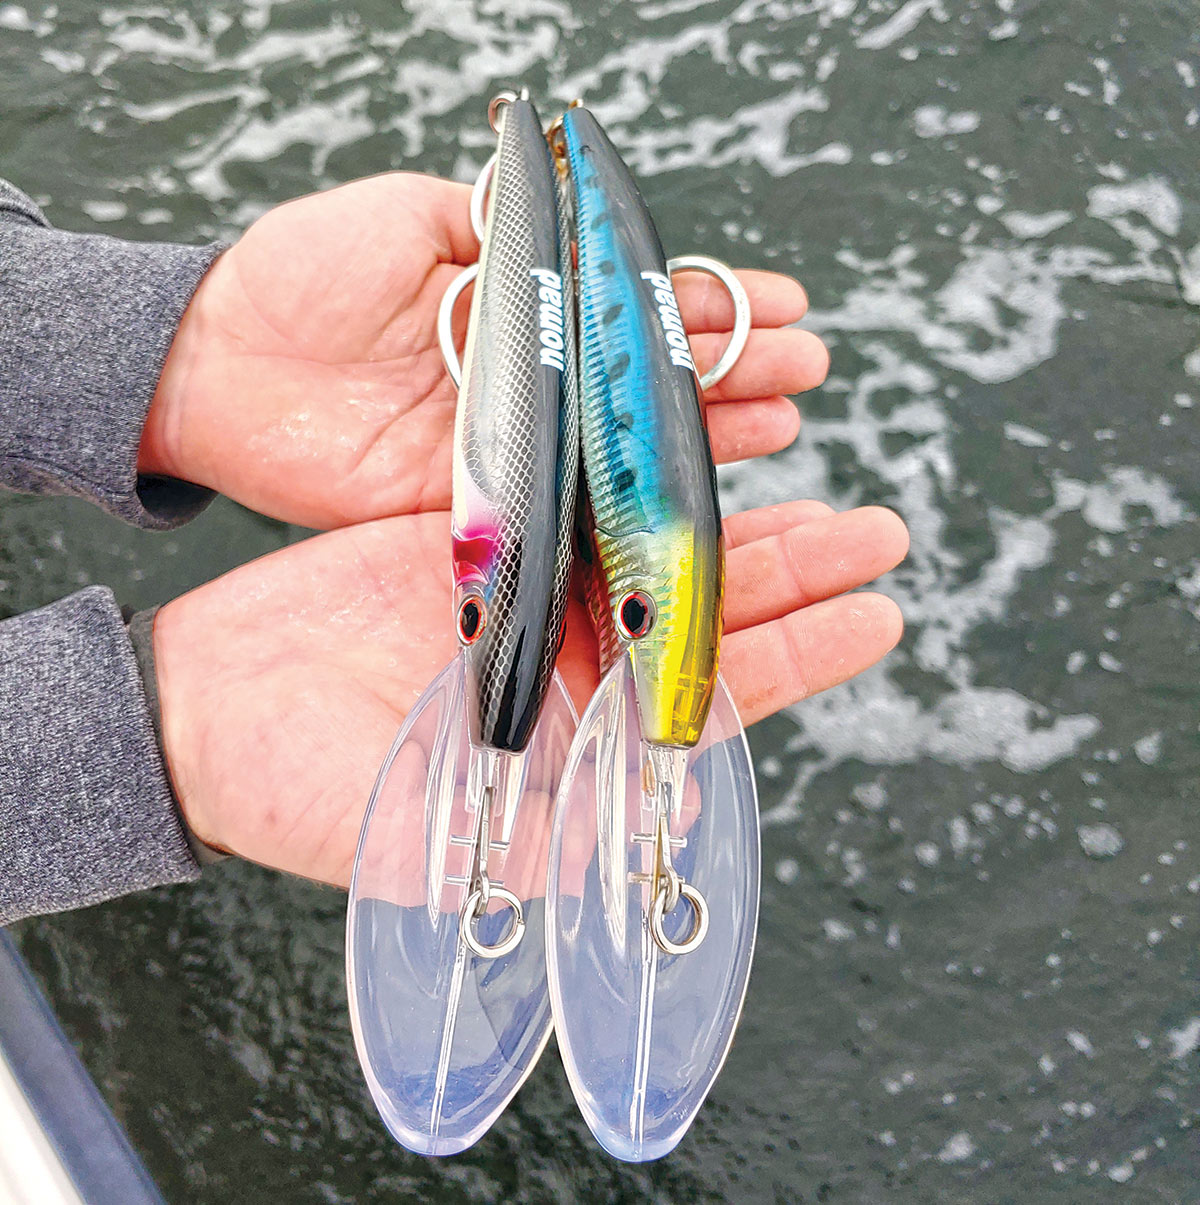 THE PAYBACK “SUPER ACTION JET” SALTWATER FISHING LURE